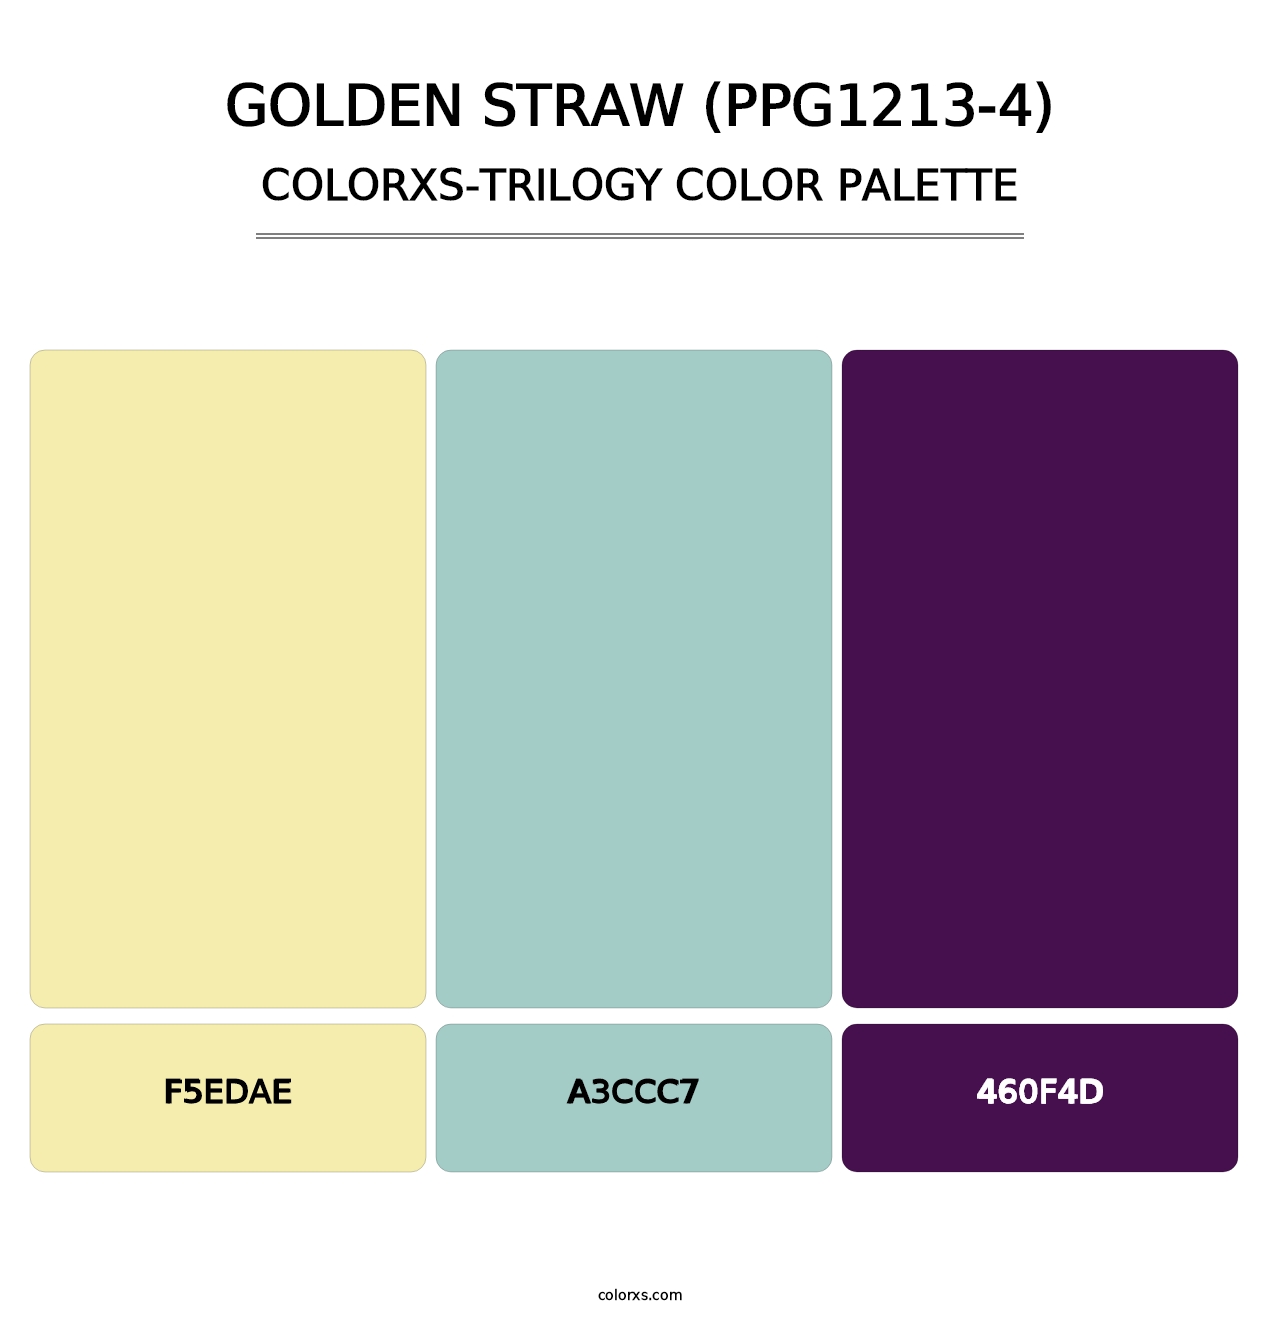 Golden Straw (PPG1213-4) - Colorxs Trilogy Palette